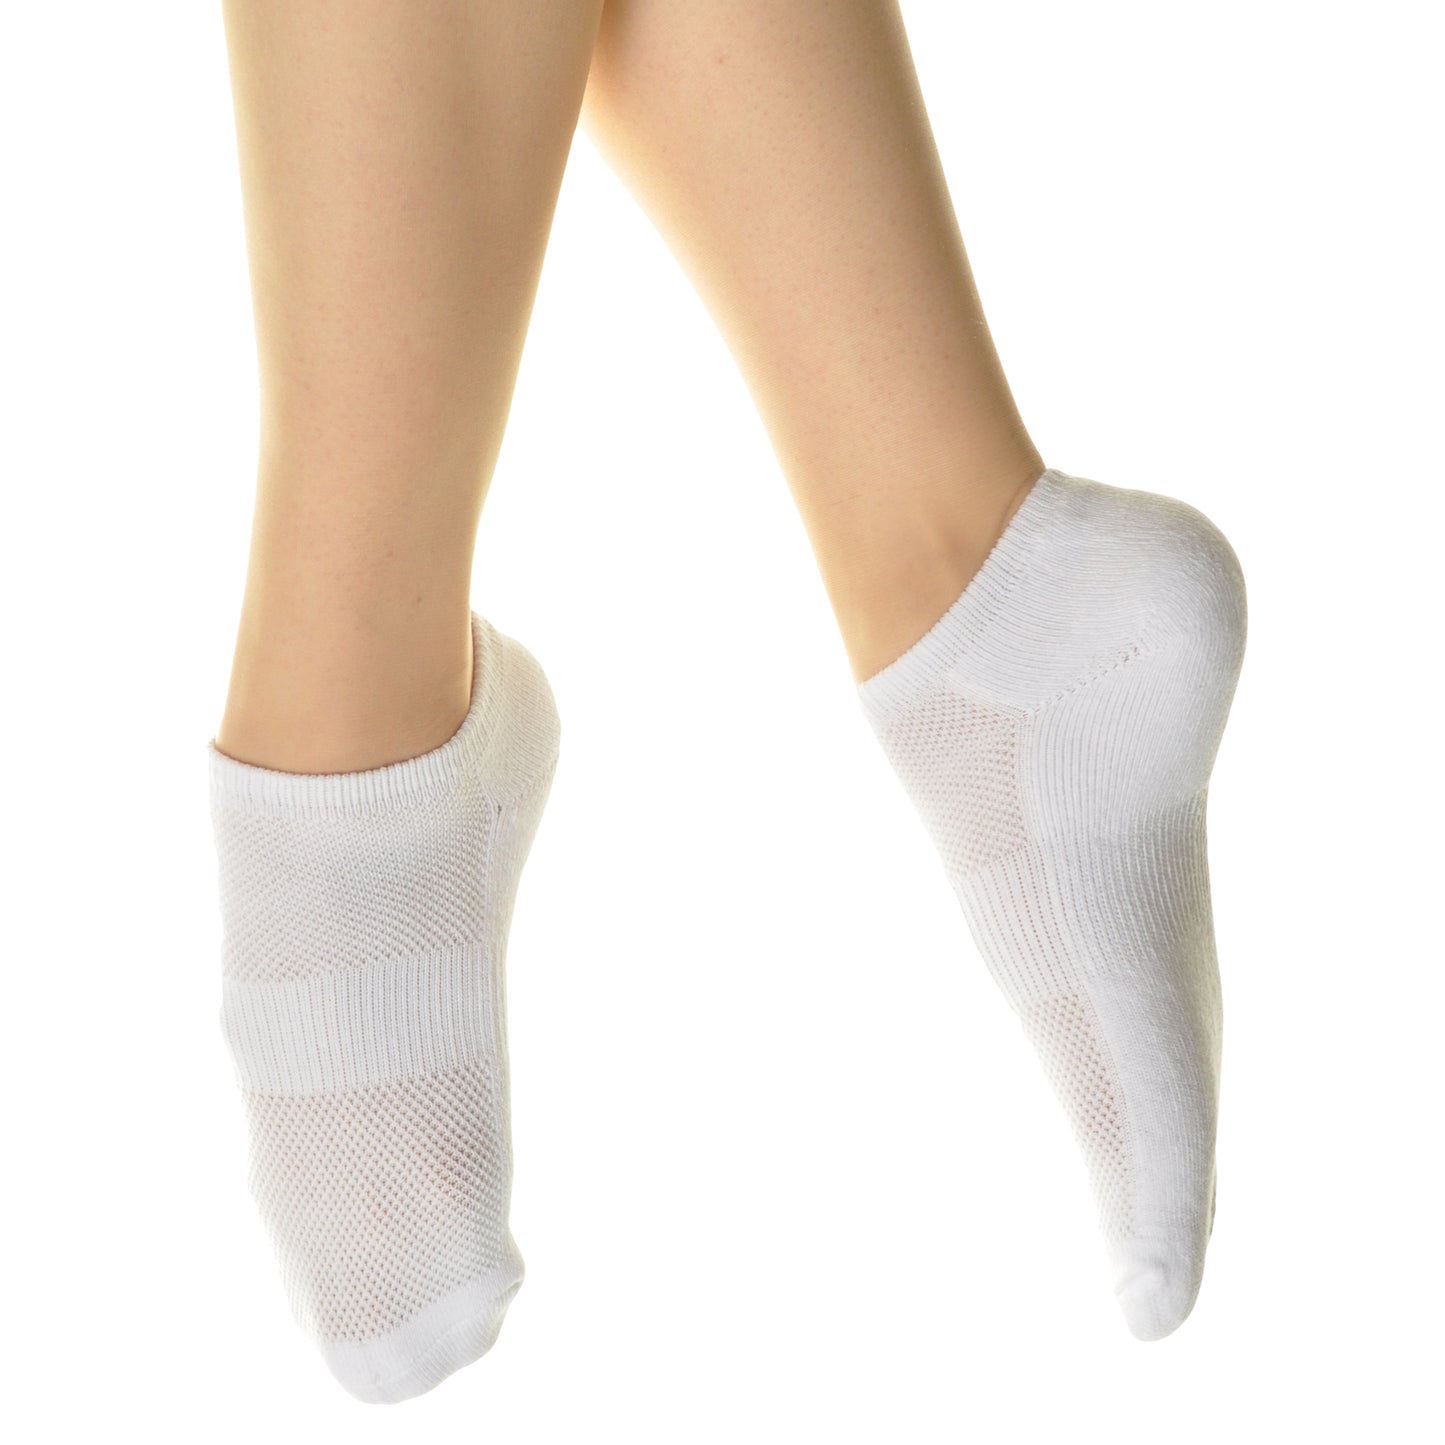 Angelina Unisex No-Show Socks with Cushioned Soles (12-Pack), #XNSOCK